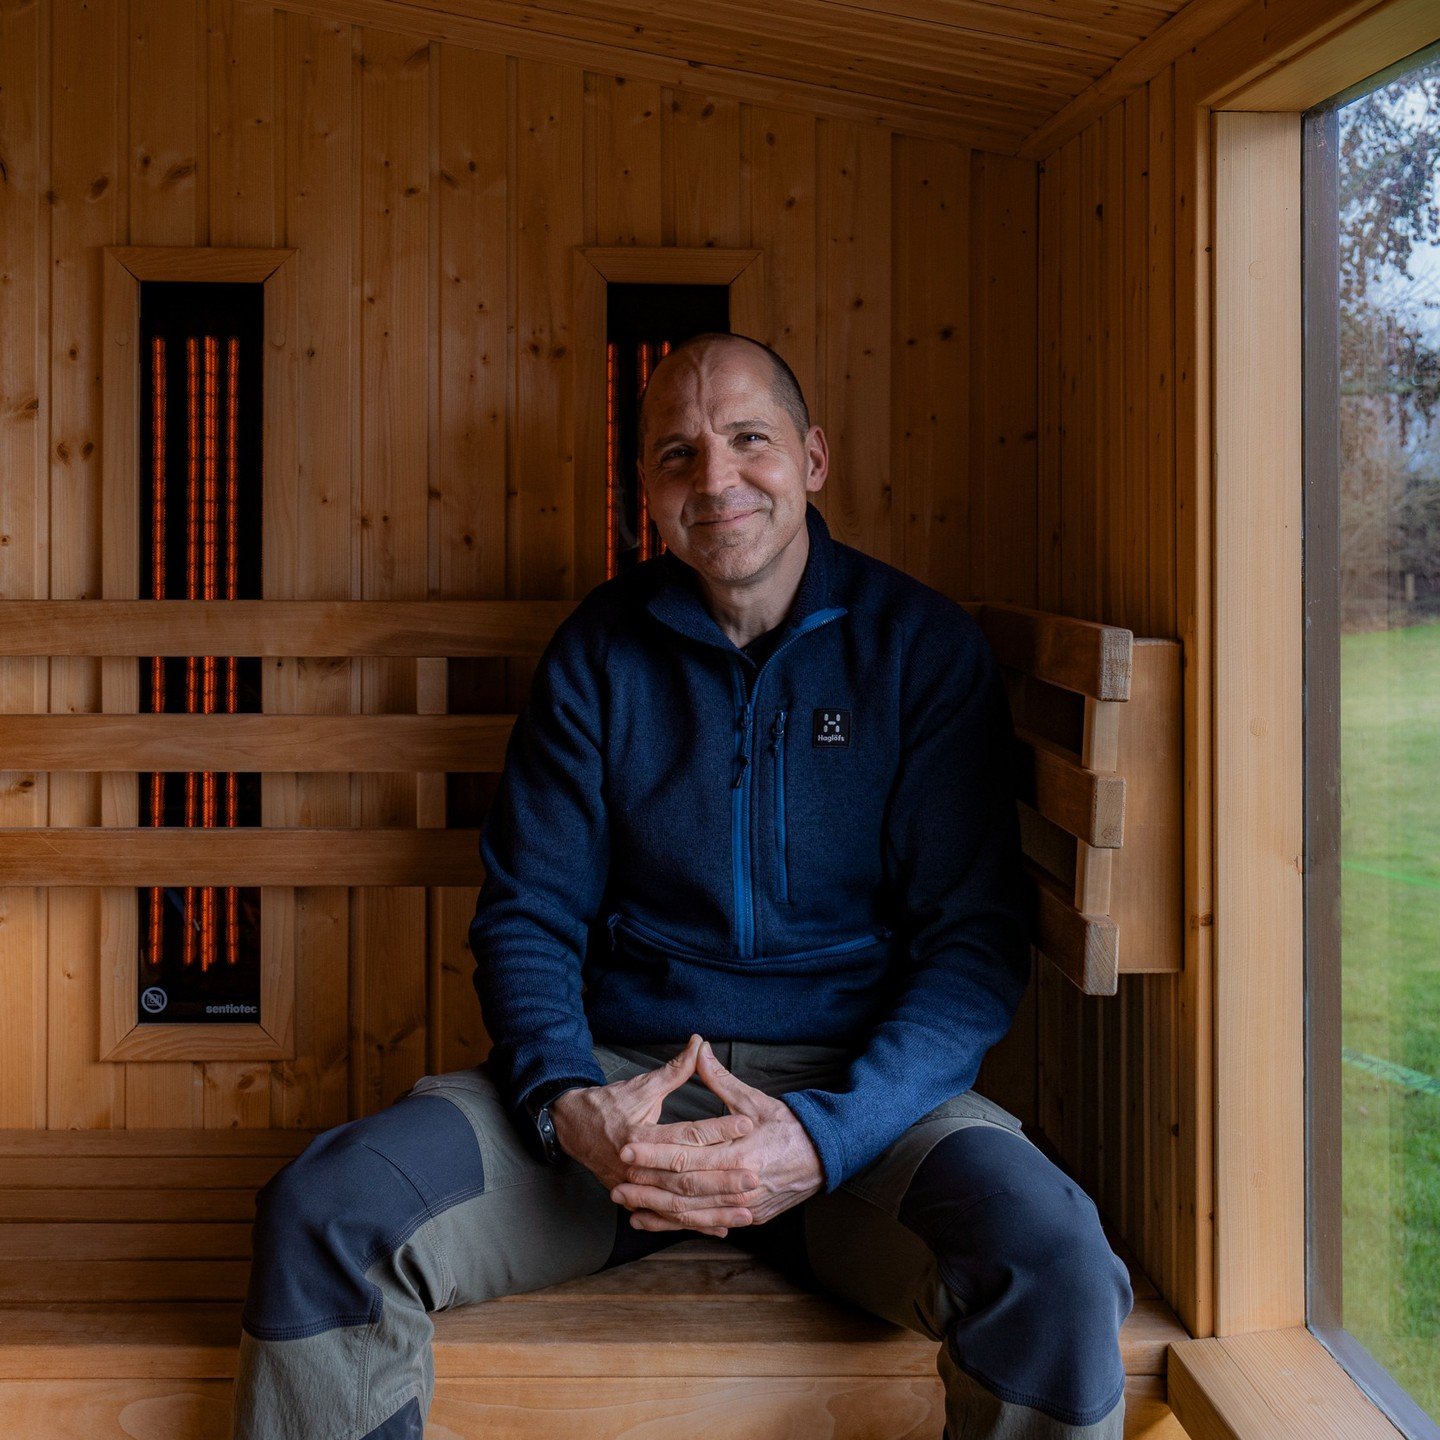 Chris McDonald commissioned a mobile sauna from us, featuring both a wood burner and infrared lights, a first of its kind. 

We completed this project a few years back. Now, we're working with Chris again on a new sauna for another house. More update